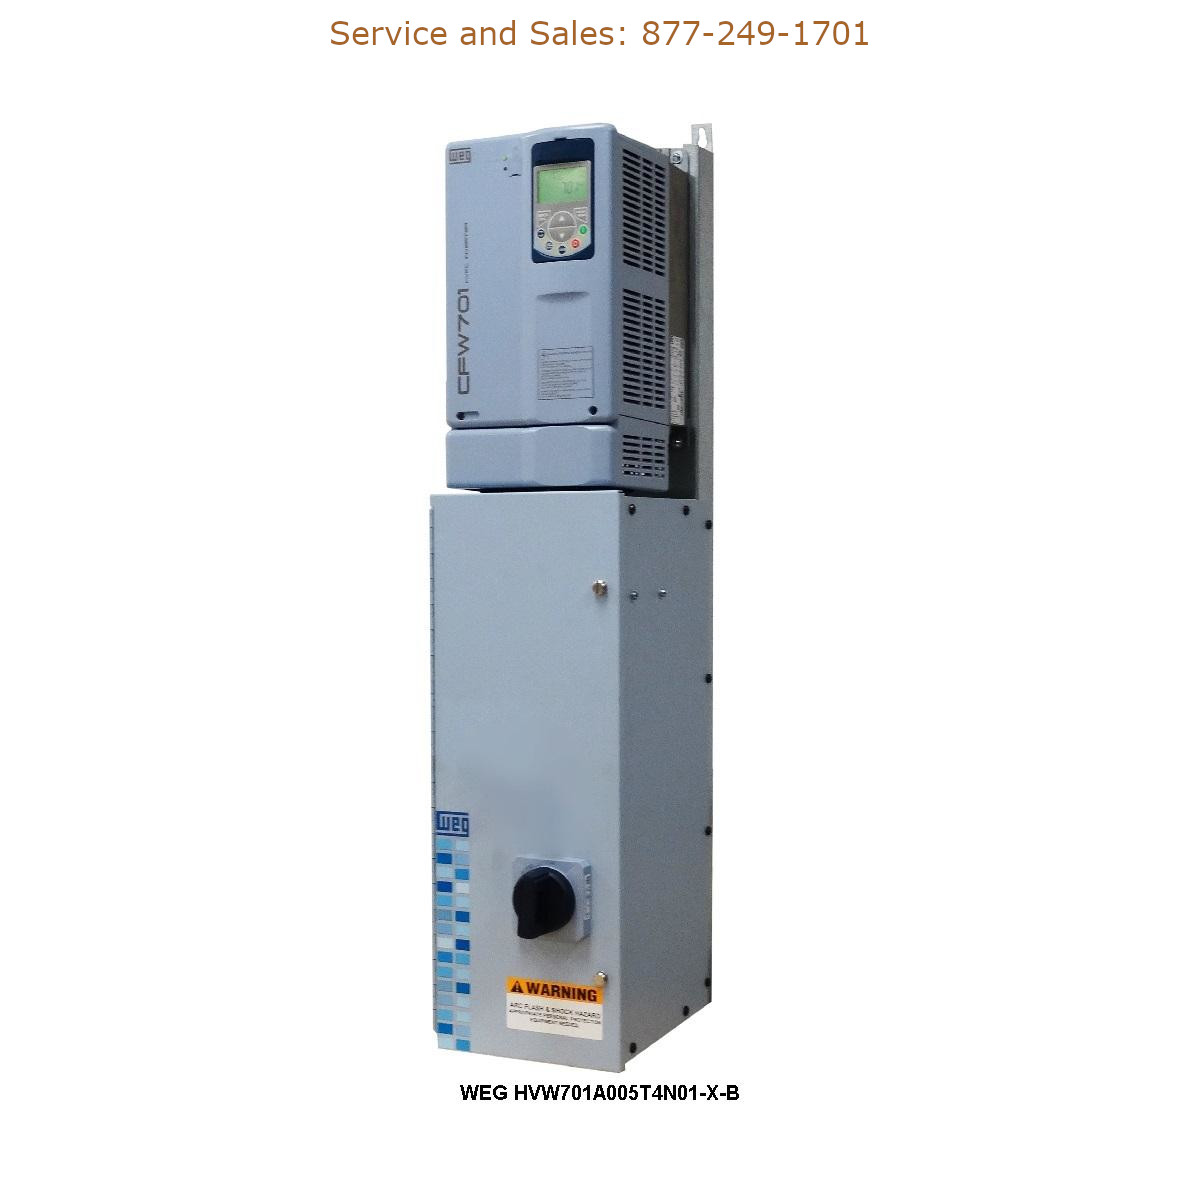 WEG HVW701A005T4N01-X-B WEG Model Number HVW701A005T4N01-X-B WEG Drives, Variable Speed Drives Repair Service, Troubleshooting, Replacement Parts https://gesrepair.com/wp-content/uploads/2022/WEG/WEG_HVW701A005T4N01-X-B_Drives_Variable_Speed_Drives.jpg